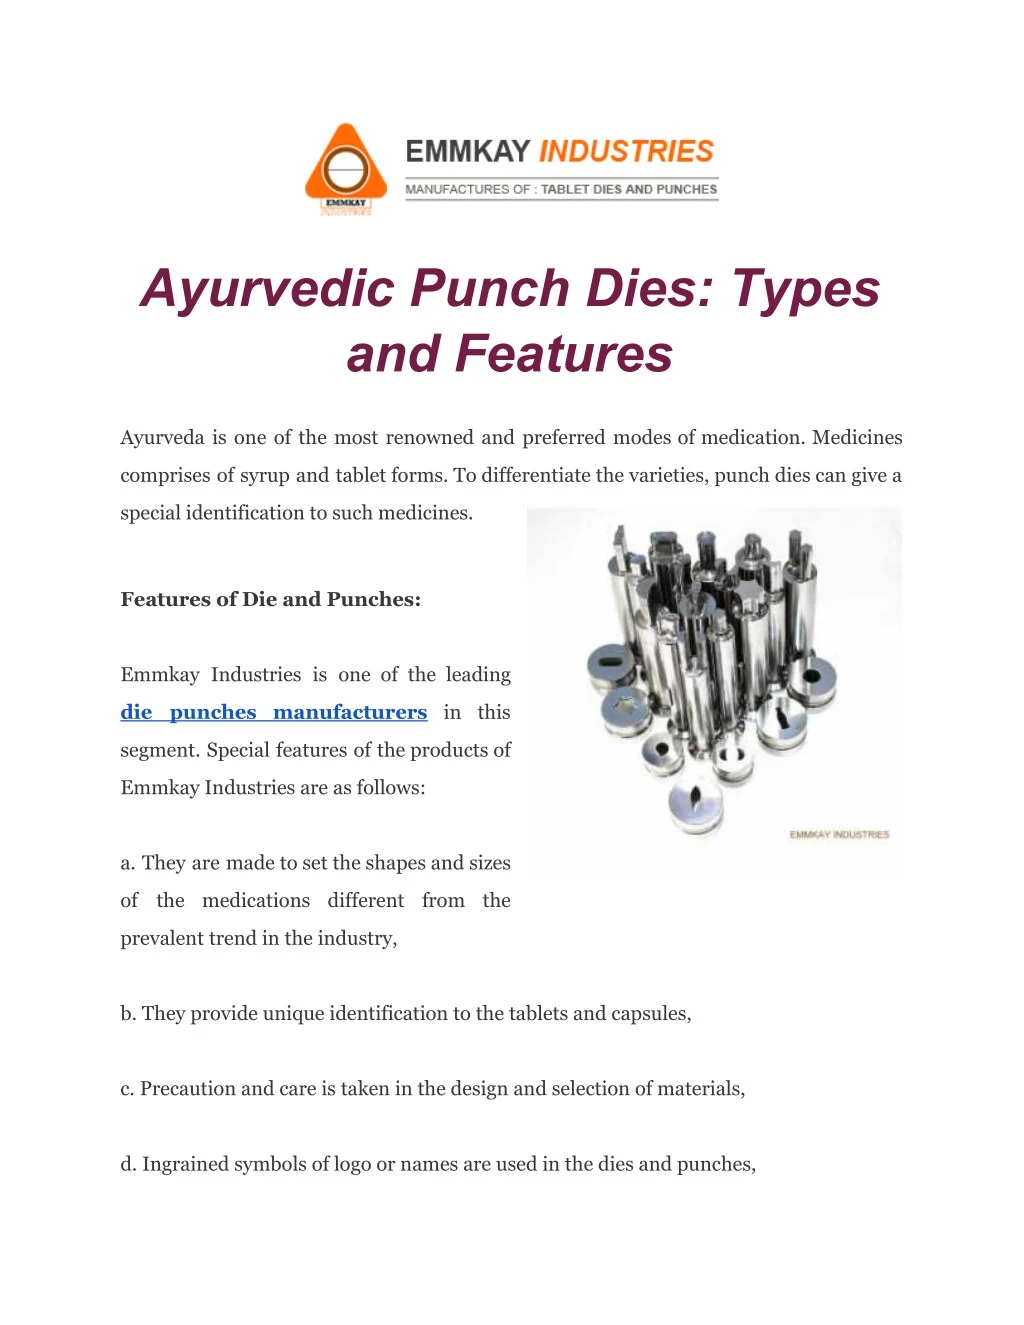 ayurvedic punch dies types and features